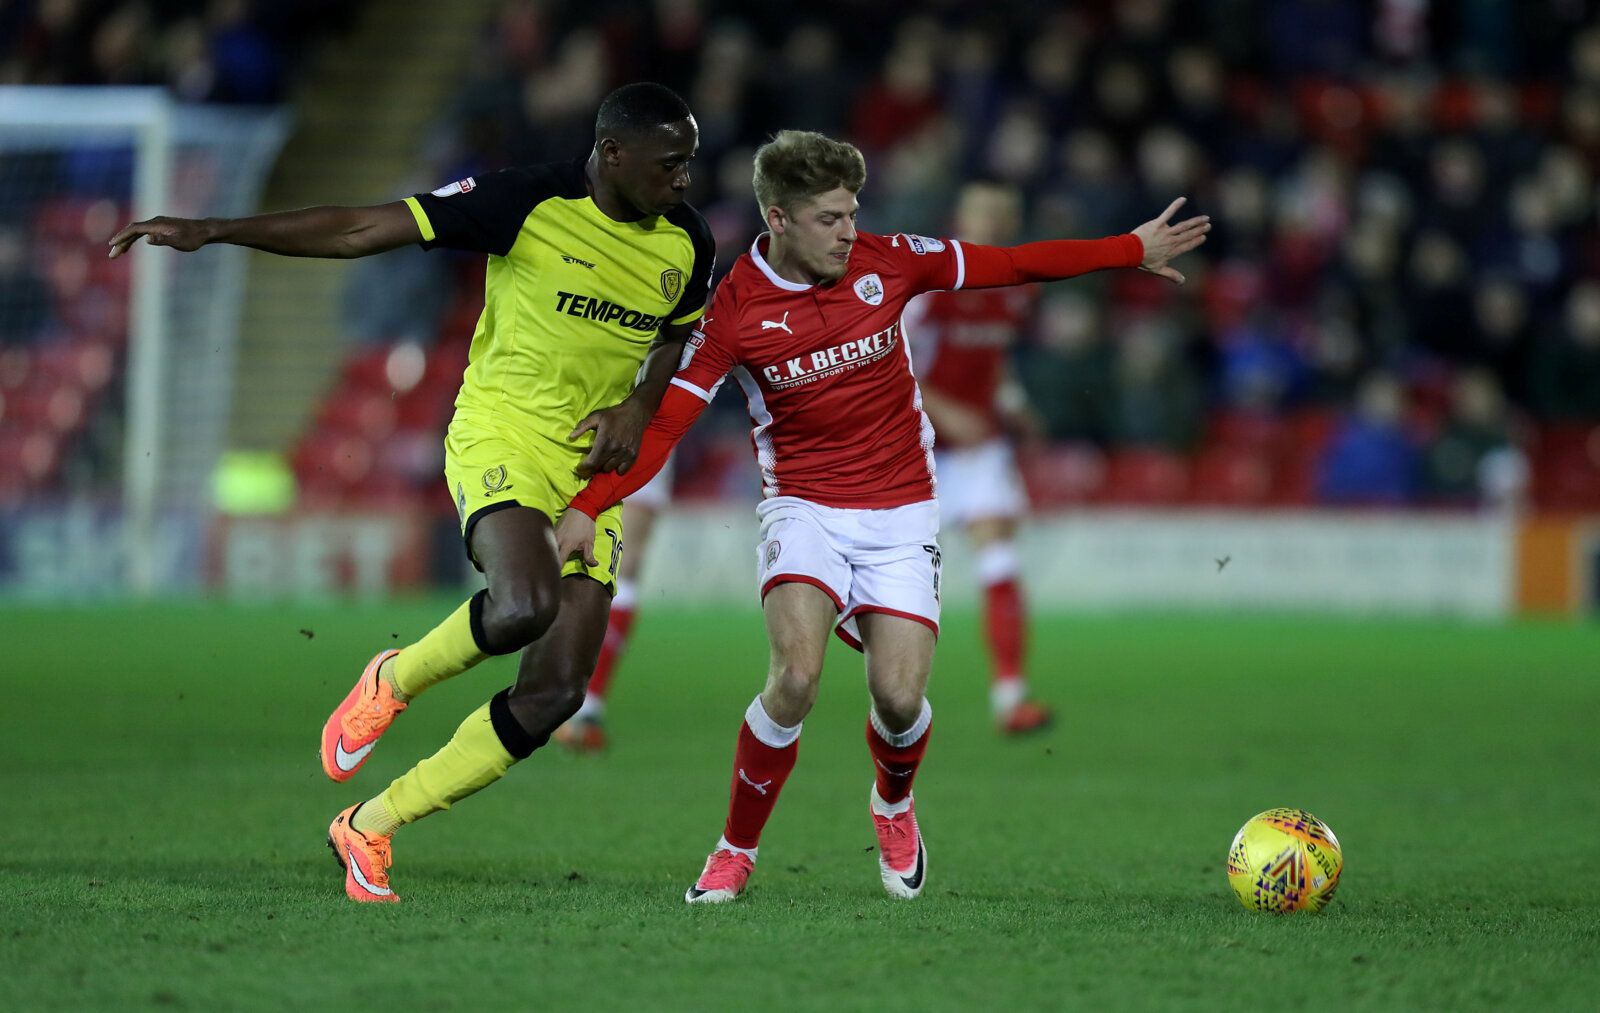 Soccer Football - Championship - Barnsley vs Burton Albion - Oakwell, Barnsley, Britain - February 20, 2018  BarnsleyÕs Lloyd Isgrove in action with Burton AlbionÕs Lucas Akins  Action Images/John Clifton  EDITORIAL USE ONLY. No use with unauthorized audio, video, data, fixture lists, club/league logos or 